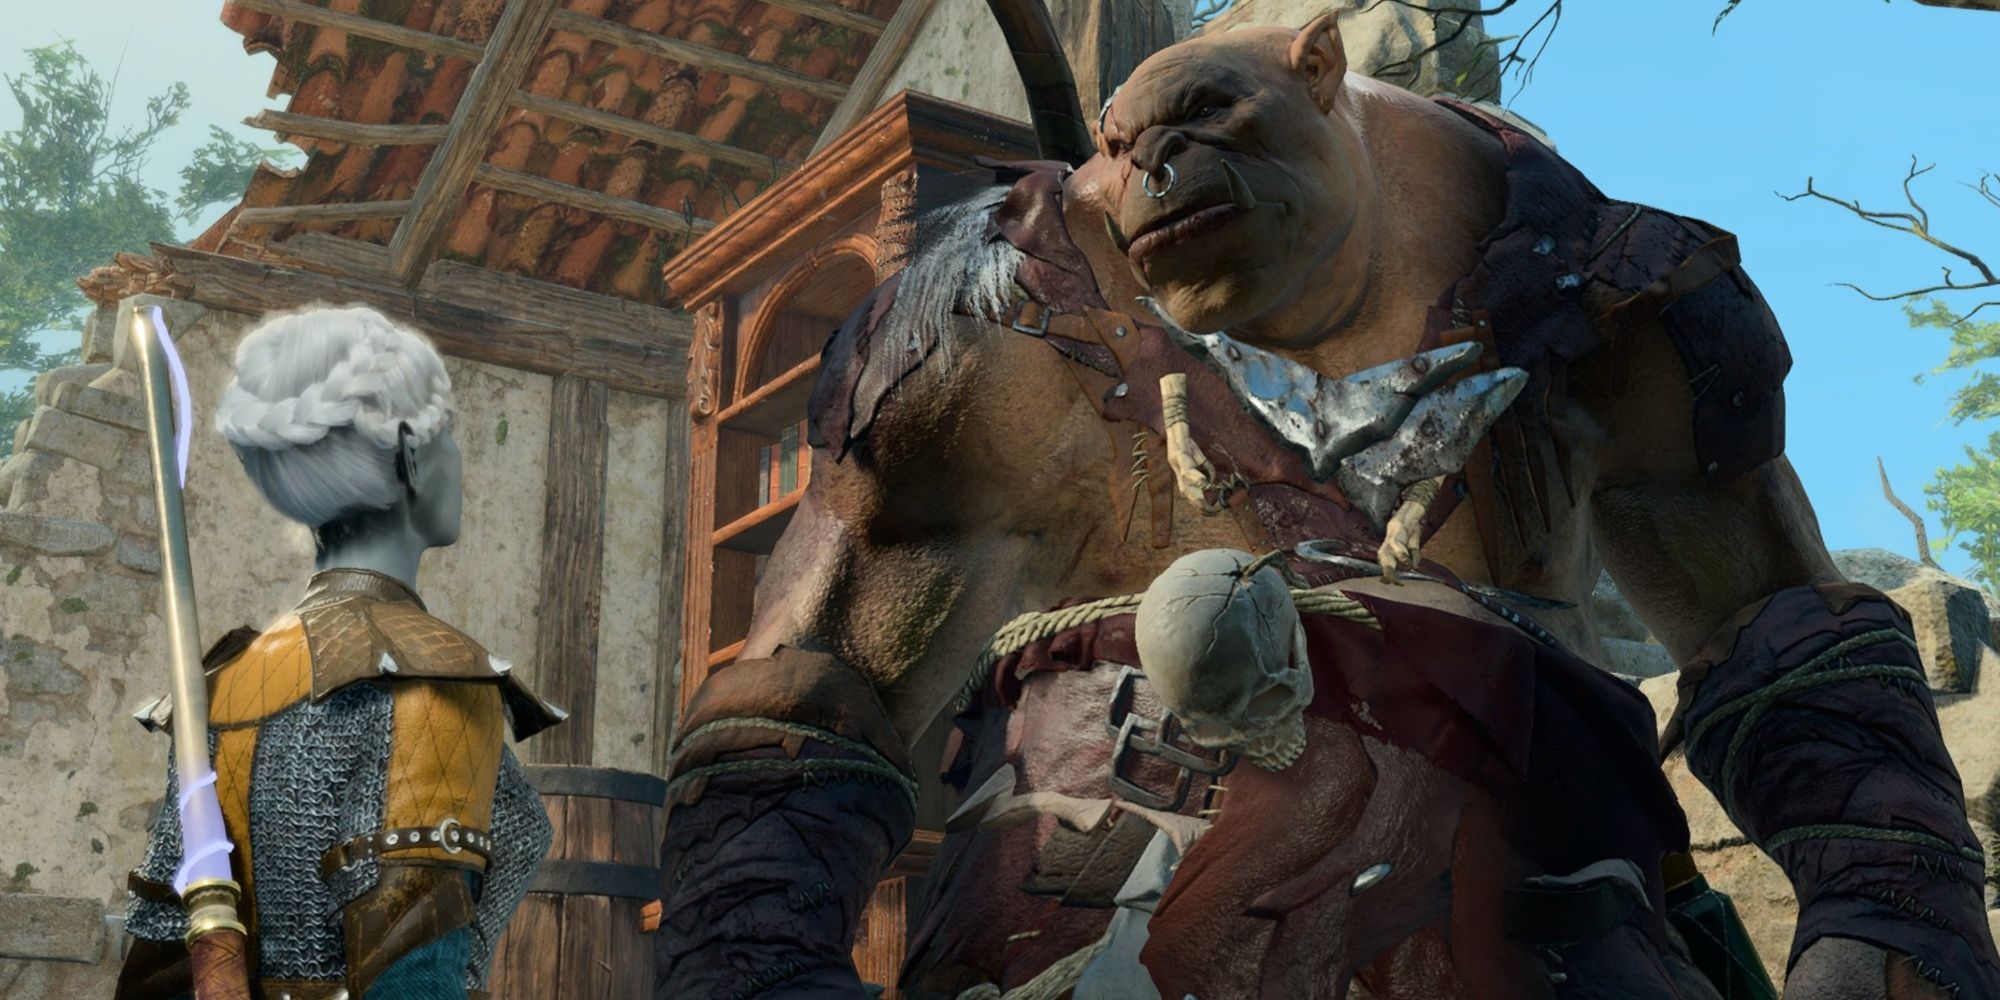 A player speaking With Lump The Enlightened Ogre At The Blighted Village in Baldur's Gate 3.